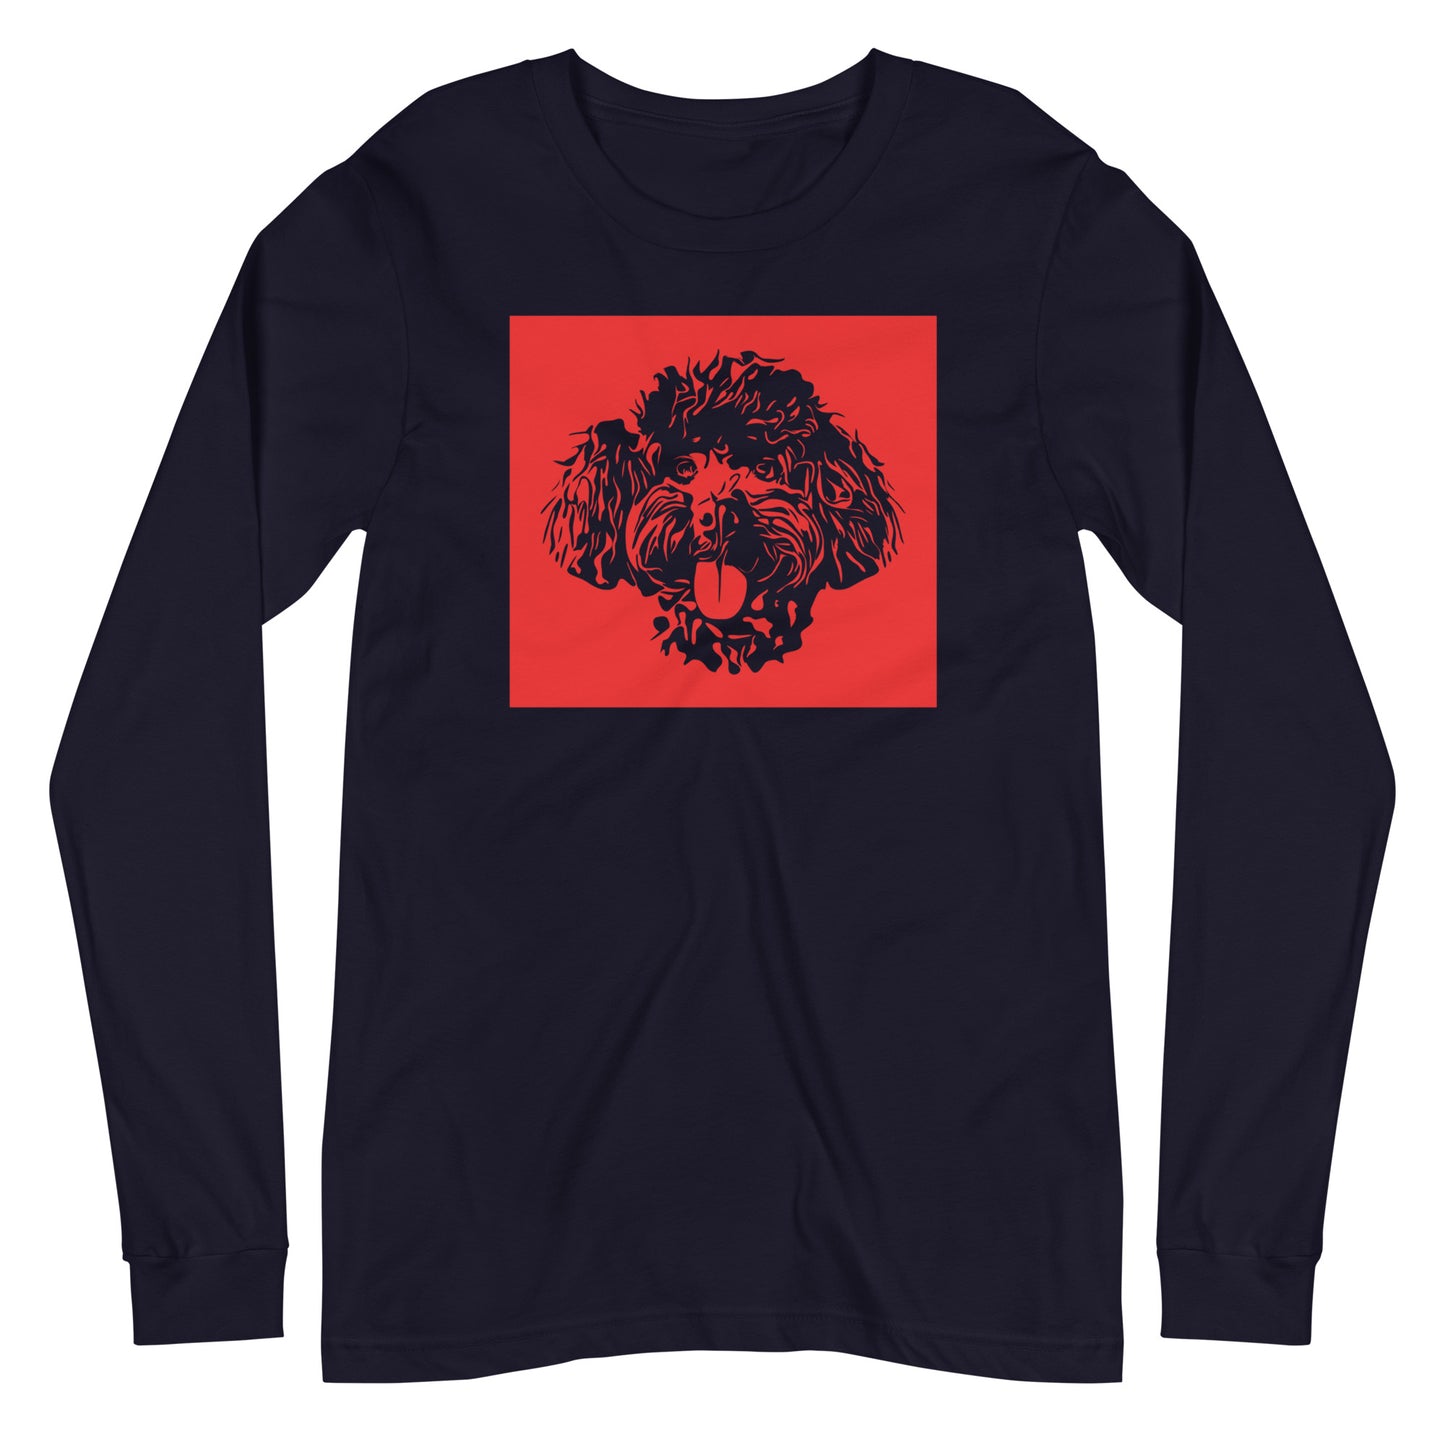 Toy Poodle face silhouette with red background square on unisex navy long sleeve t-shirt